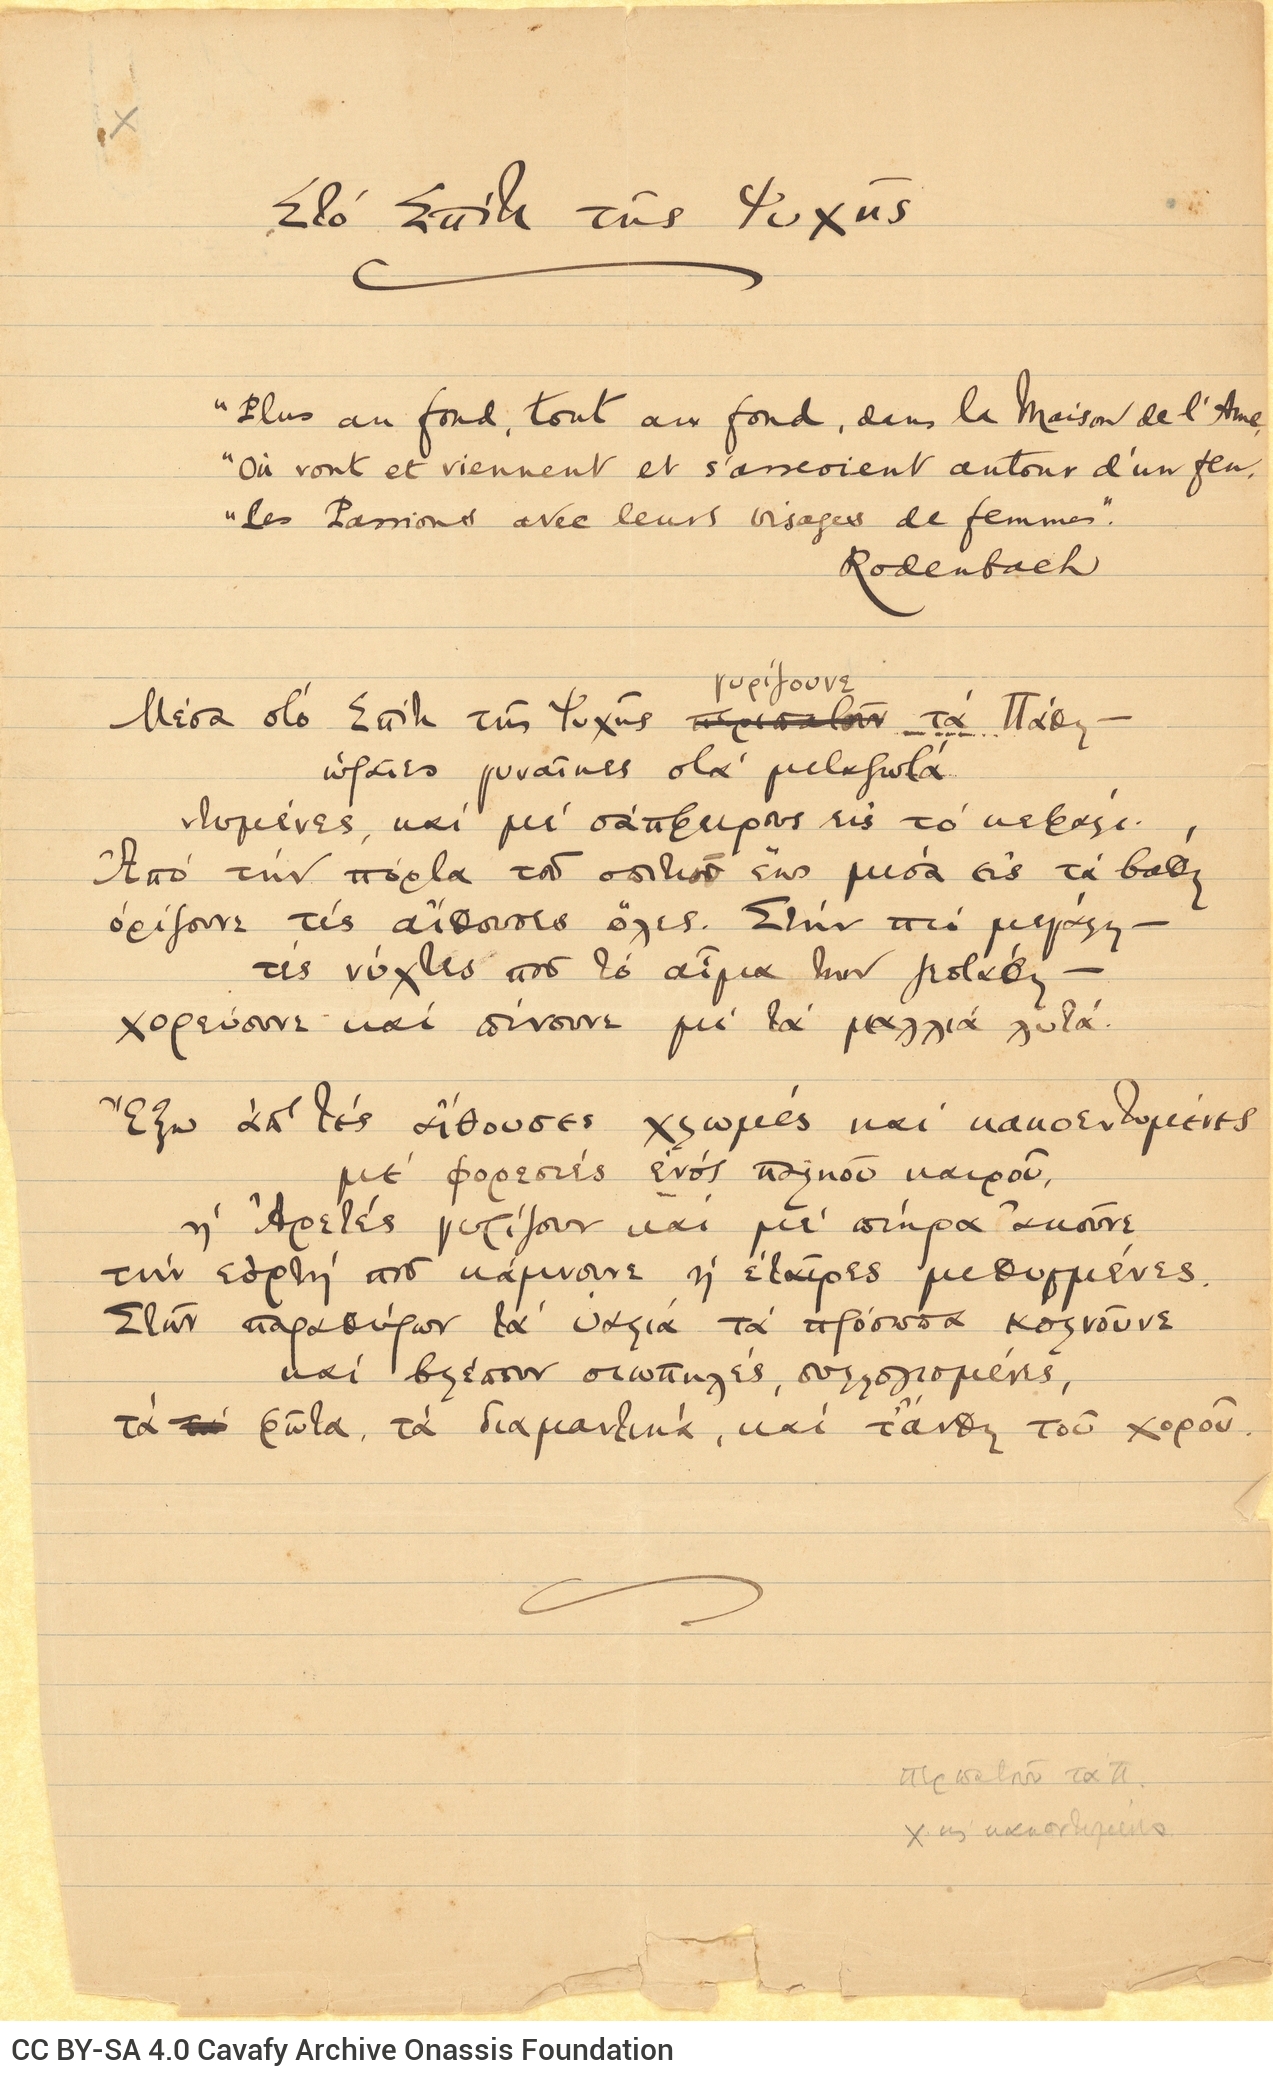 Manuscript of a poem and attached handwritten note. On one side of a sheet, the poem "In the House of the Soul" and note i